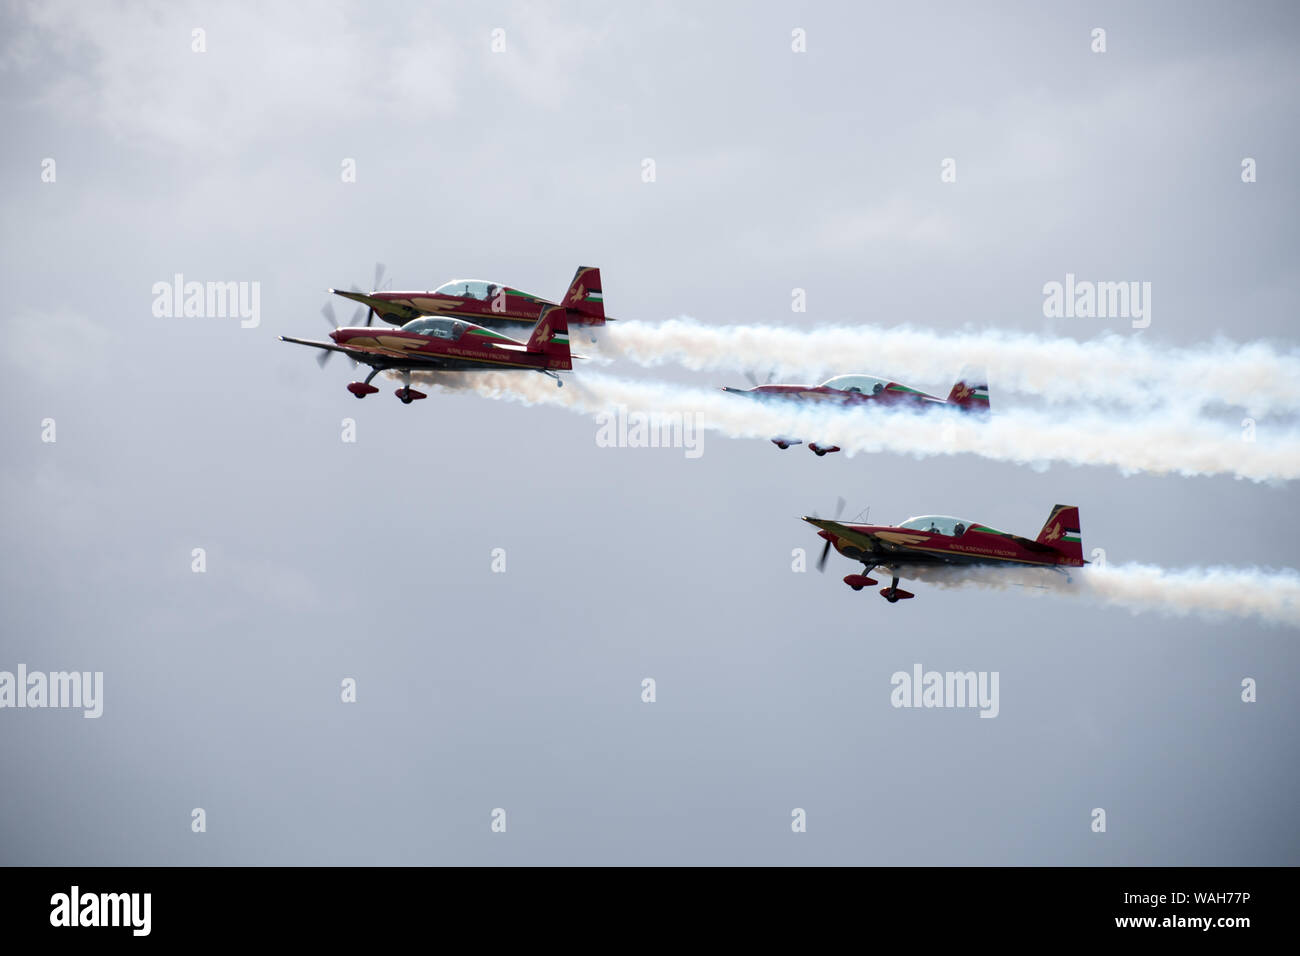 Royal Jordanian Falcons aerial display with smoke in air during formation flying Stock Photo